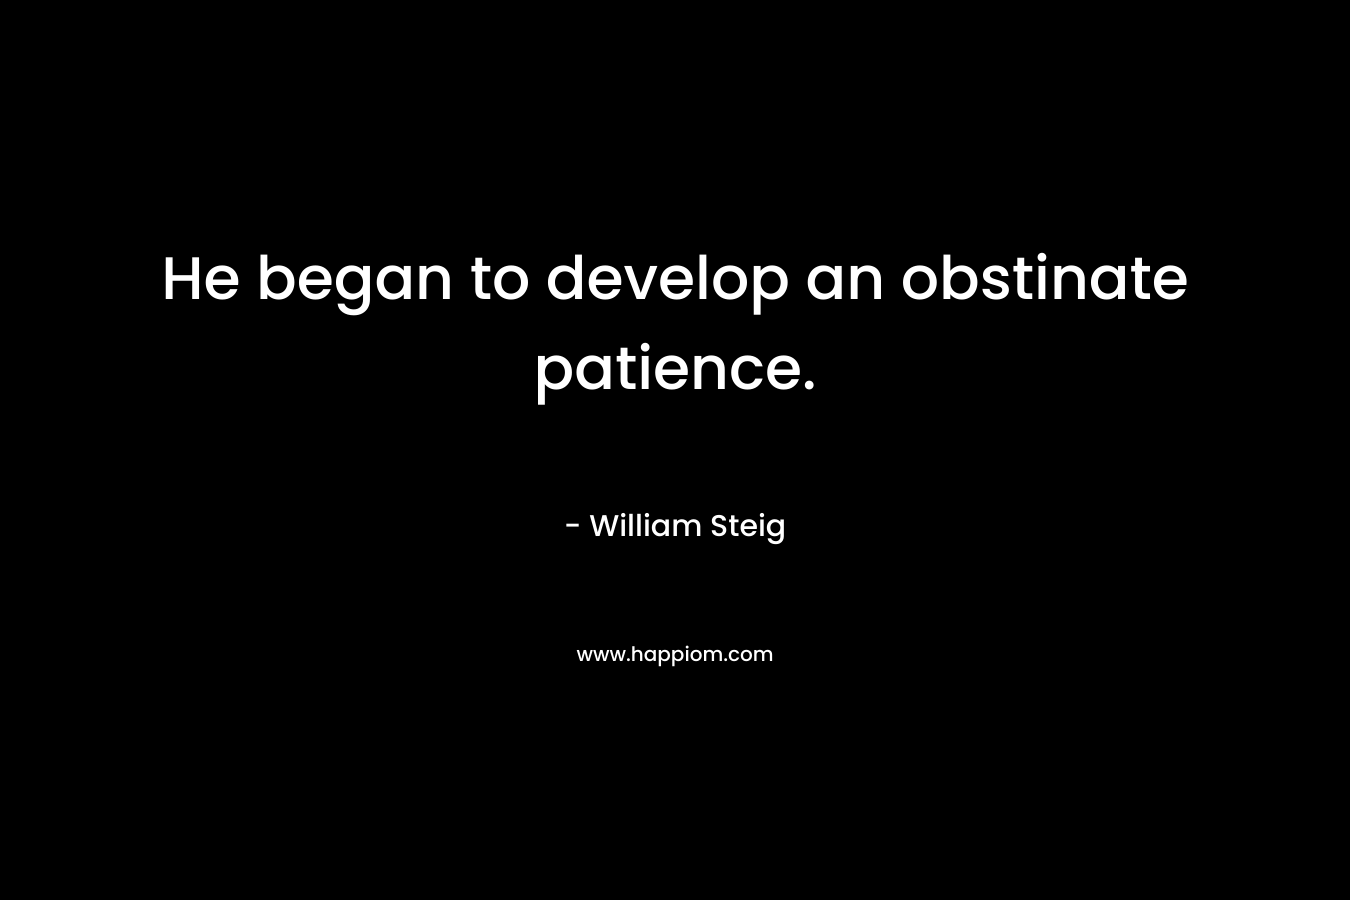 He began to develop an obstinate patience. – William Steig